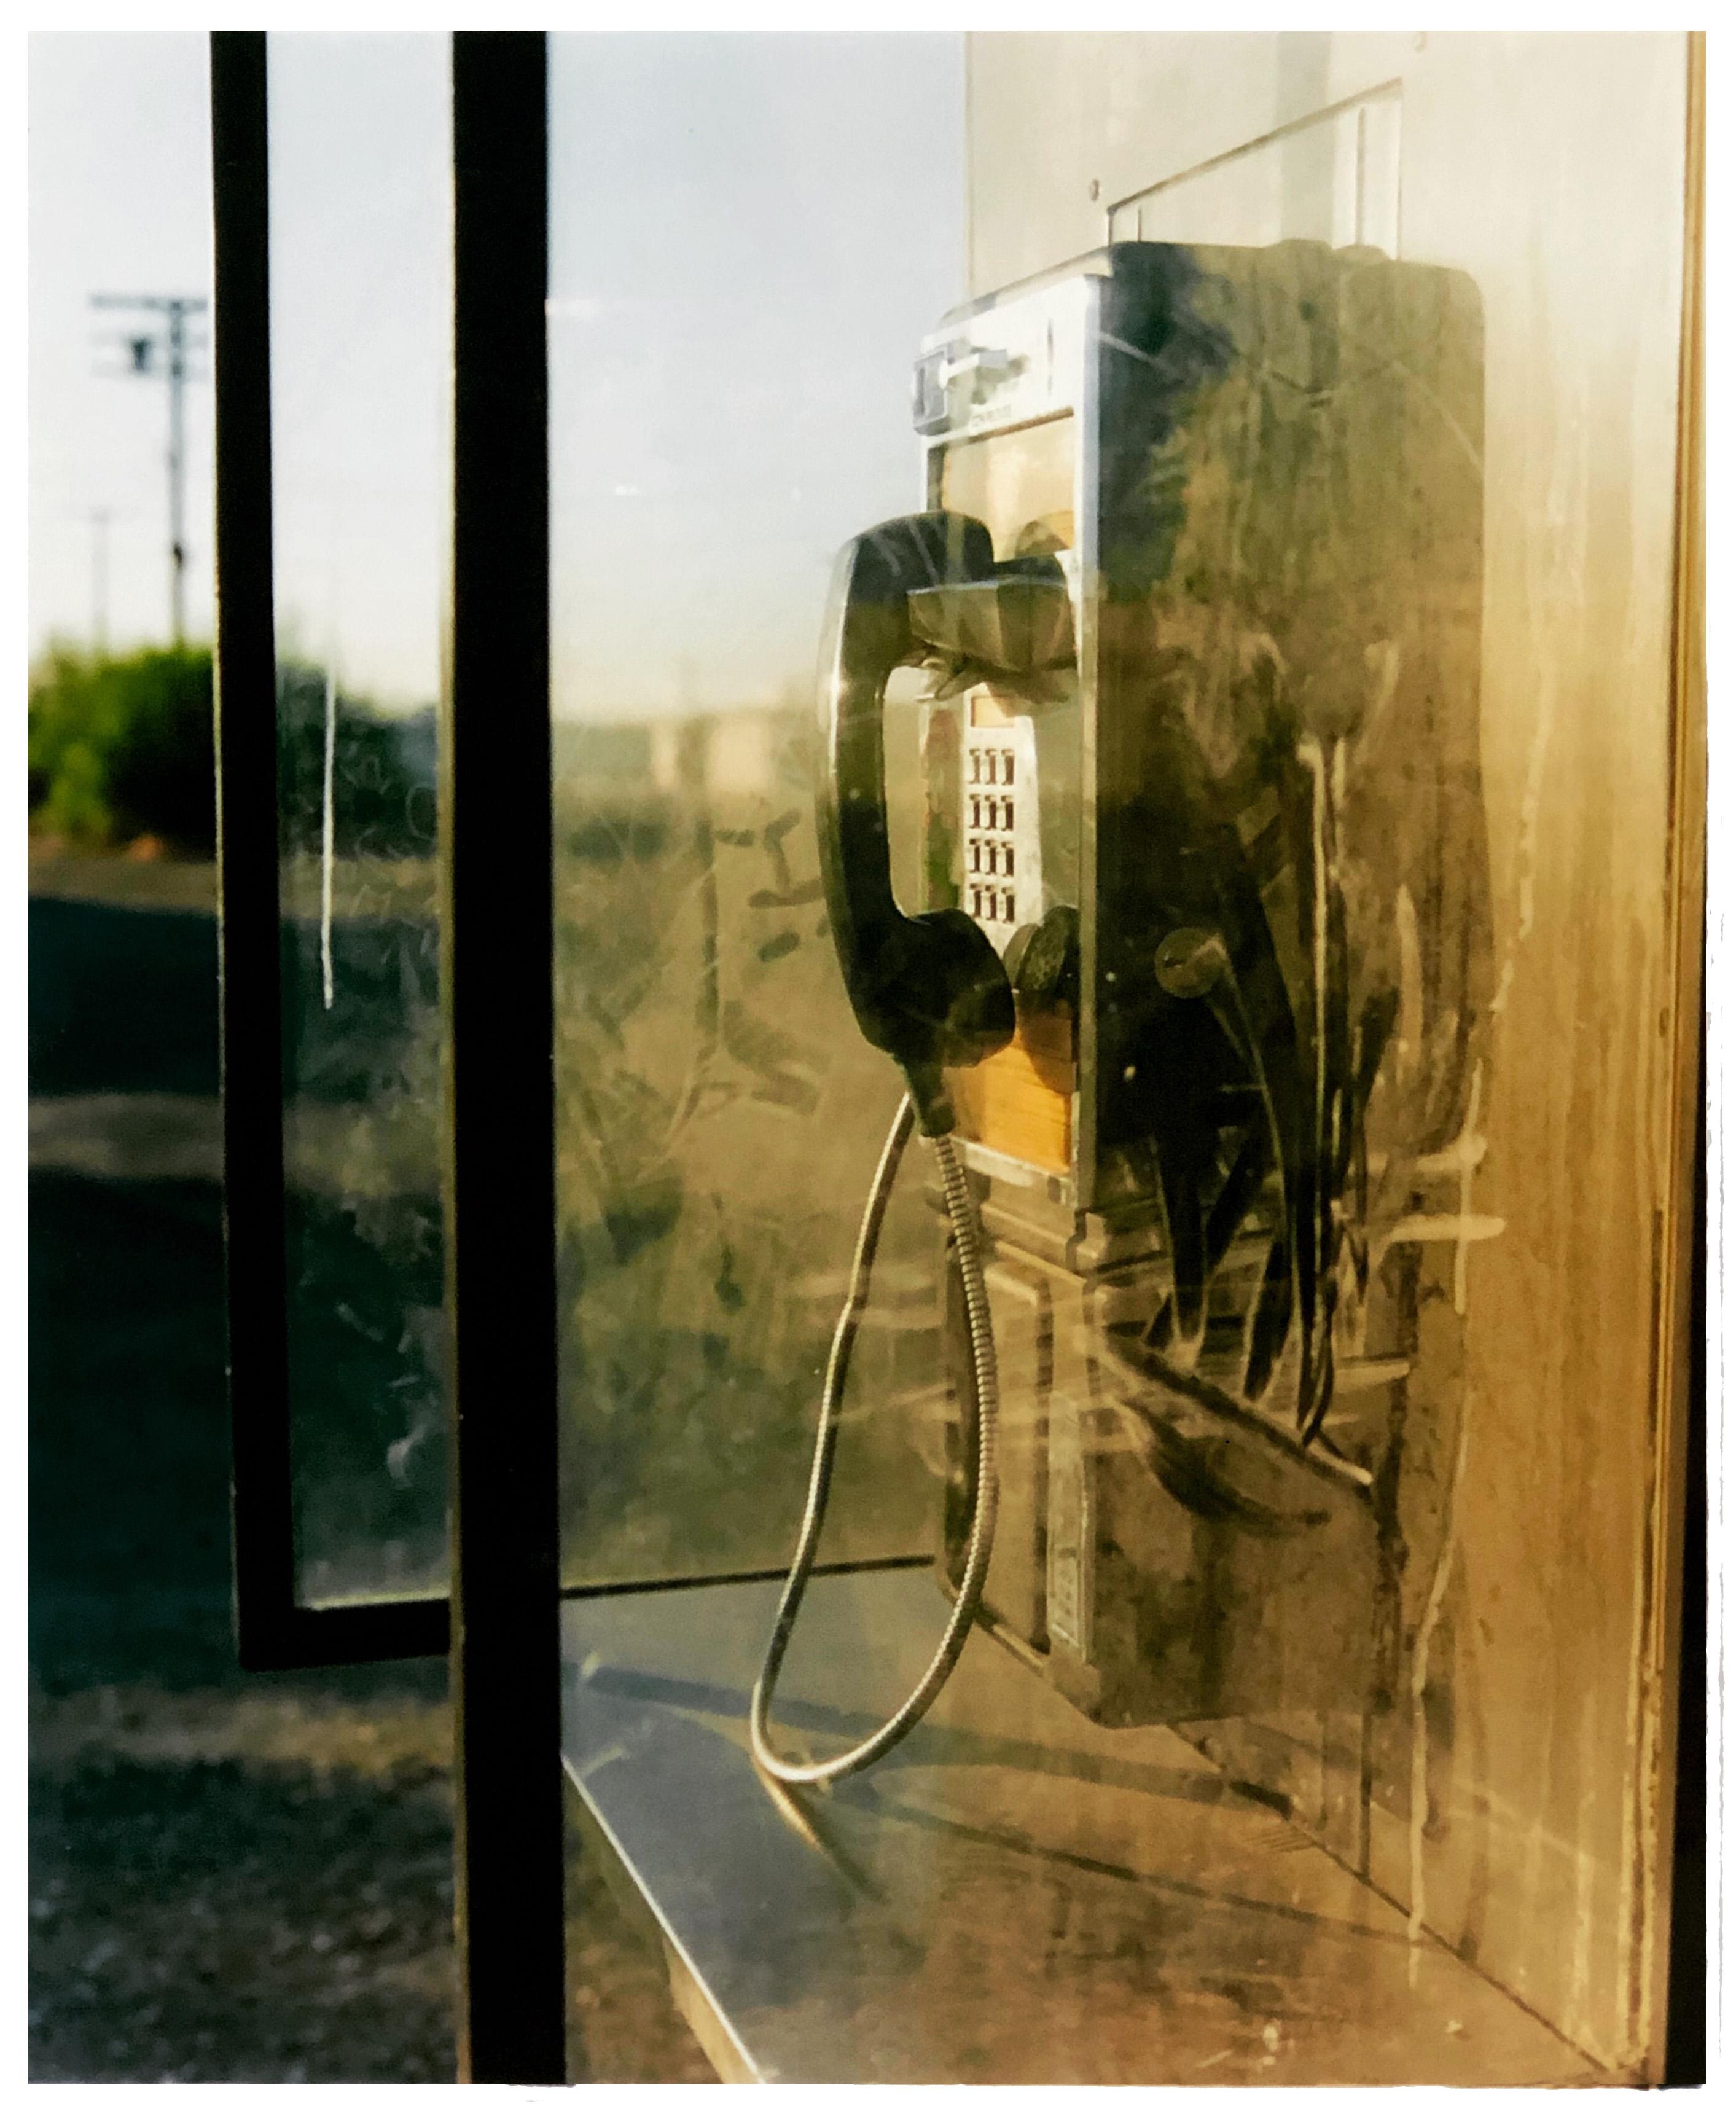 'Call Booth', photograph from Richard Heeps Salton Sea series.
This cinematic neo-noir style picture shows the classic American roadside Phone Booth, something which we look at very differently today as there is less and less need for them. Like